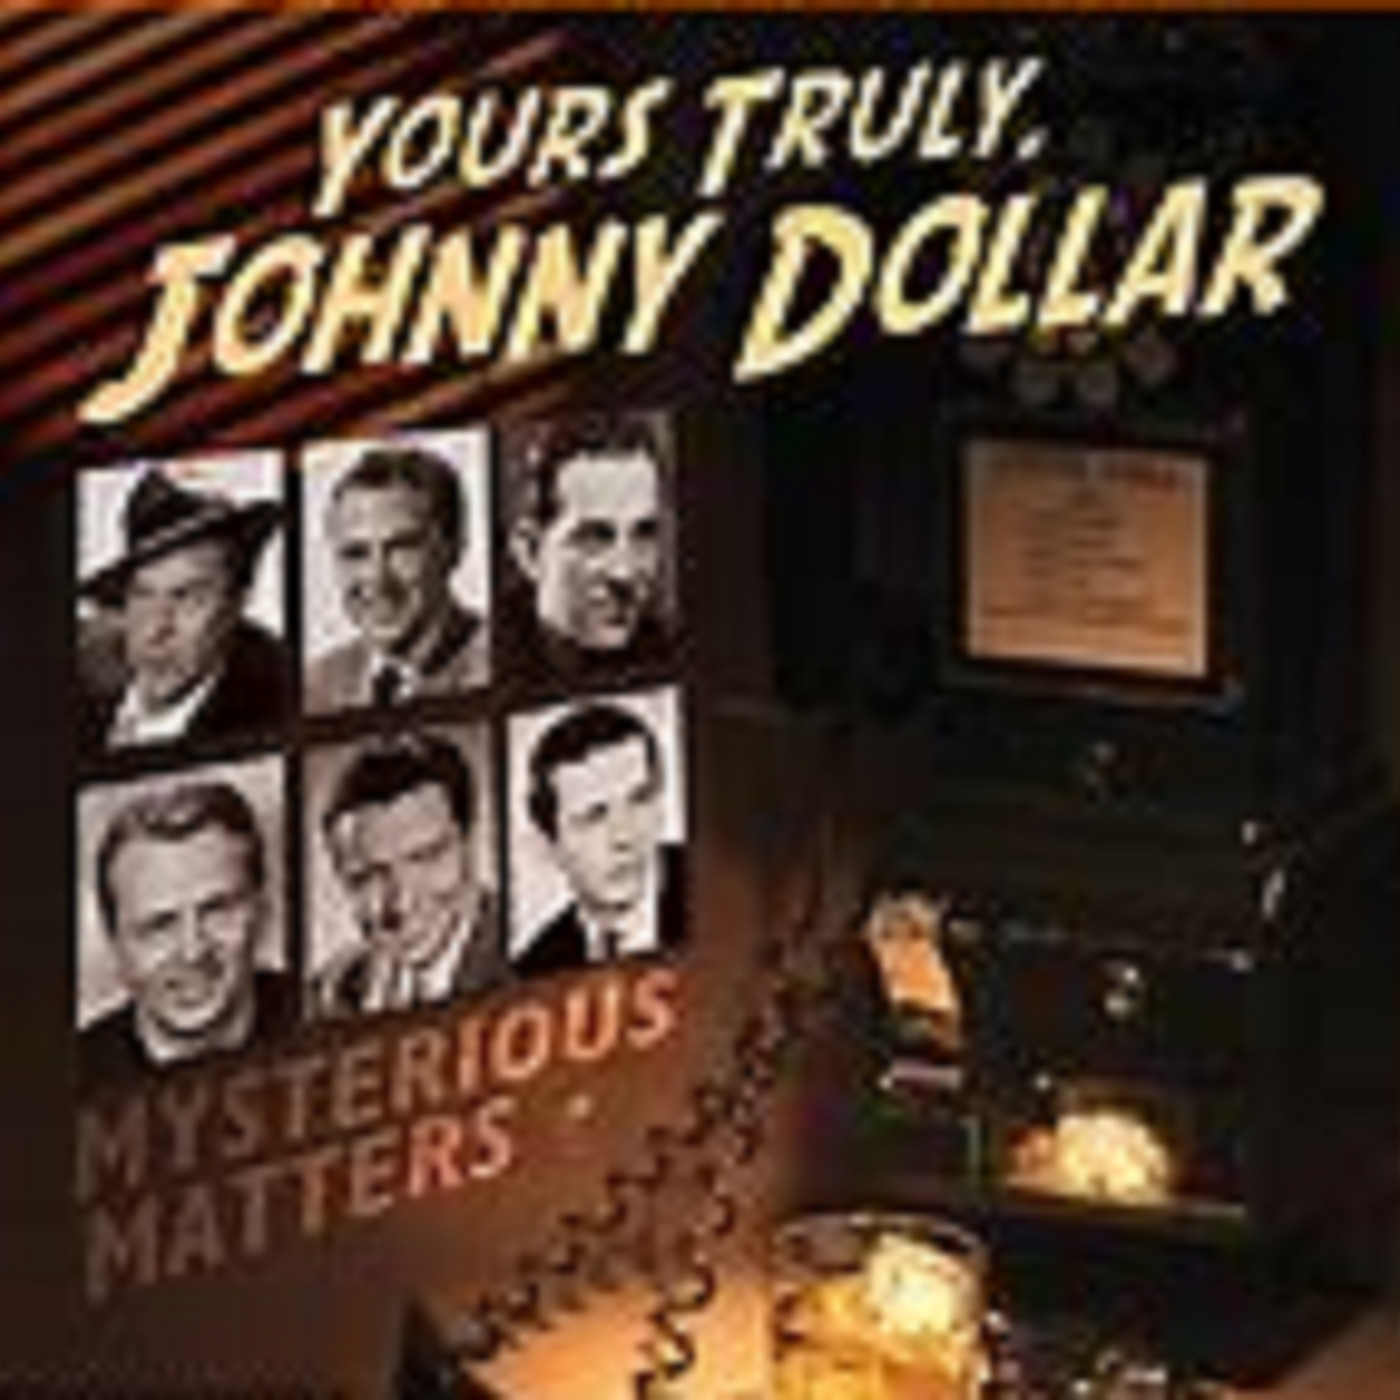 Yours Truly, Johnny Dollar - 082160, episode 702 - The Twisted Twin Matter